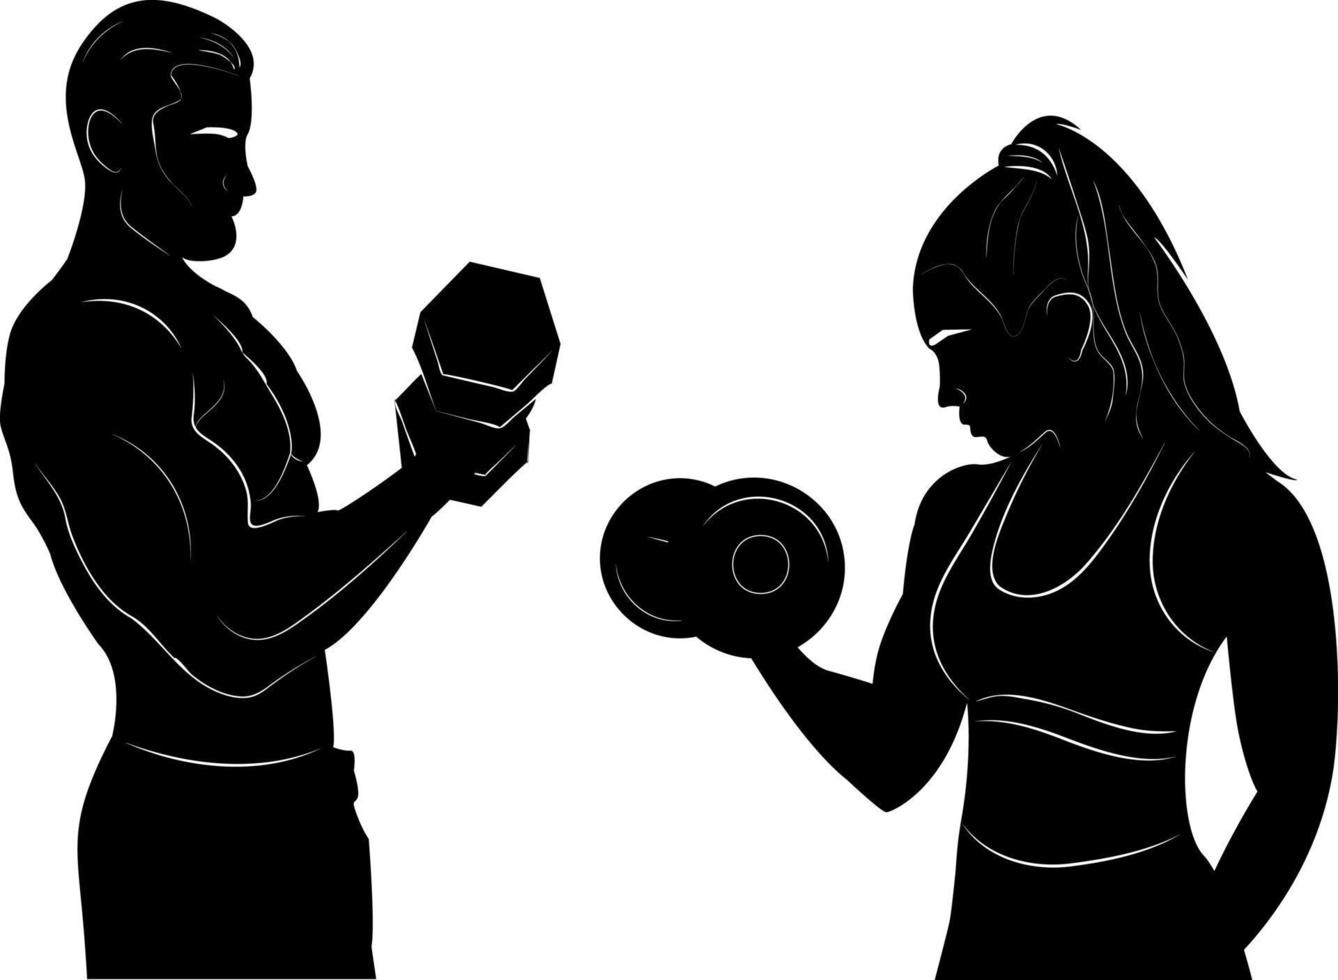 Silhouette. Woman and man in training. Dumbbells. Fitness. Logo. Sport. GYM. Bodybuilding. vector